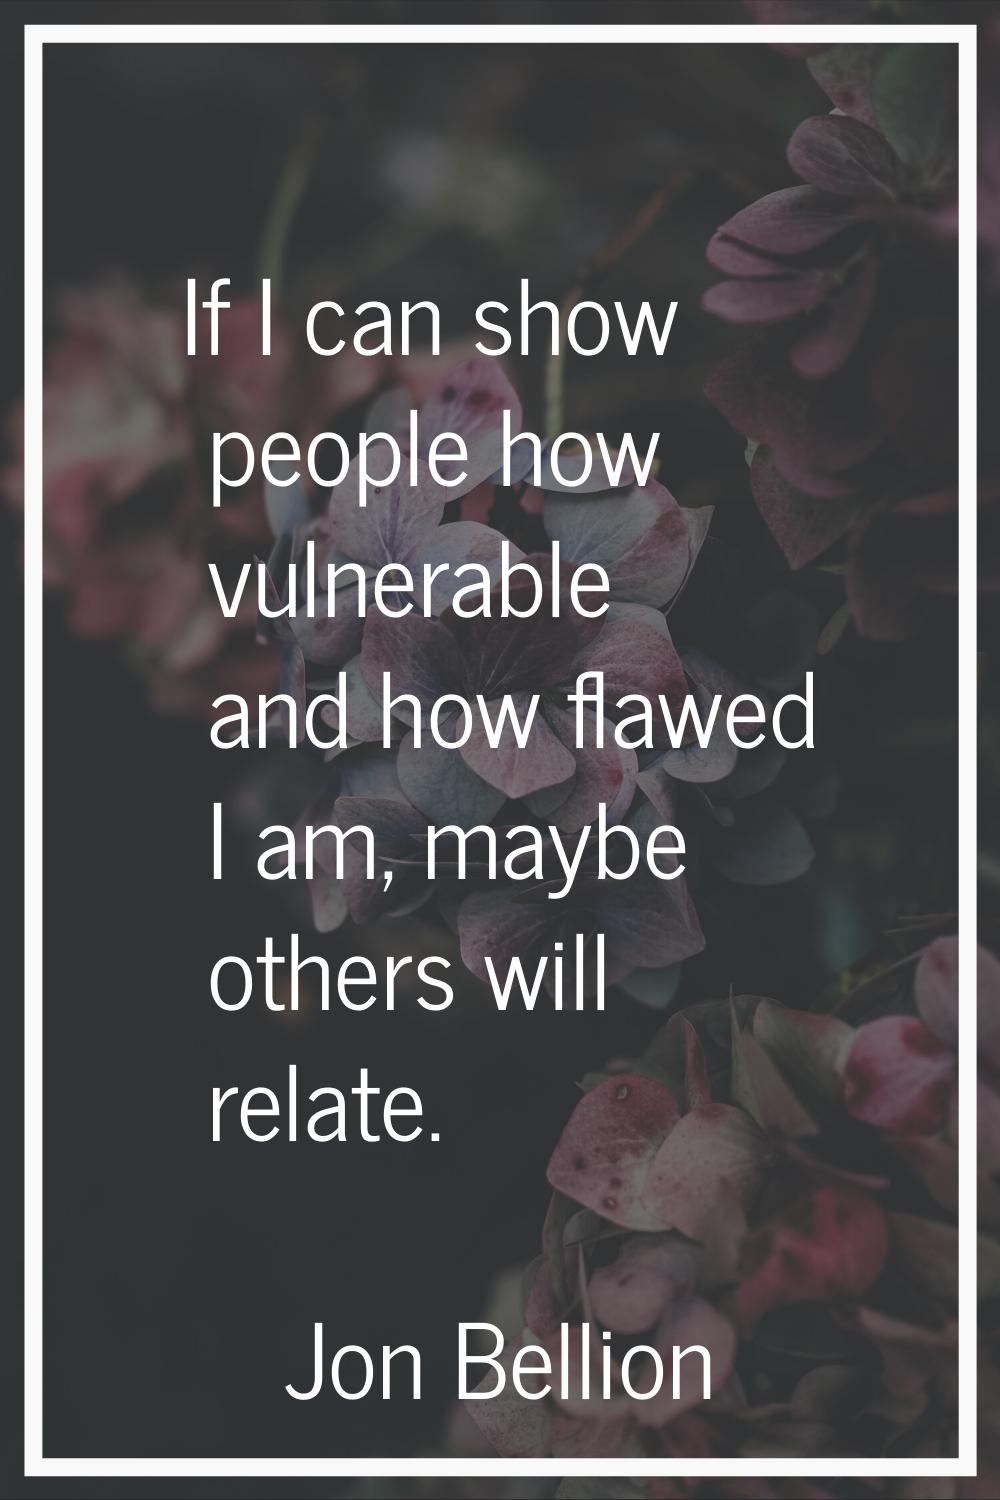 If I can show people how vulnerable and how flawed I am, maybe others will relate.